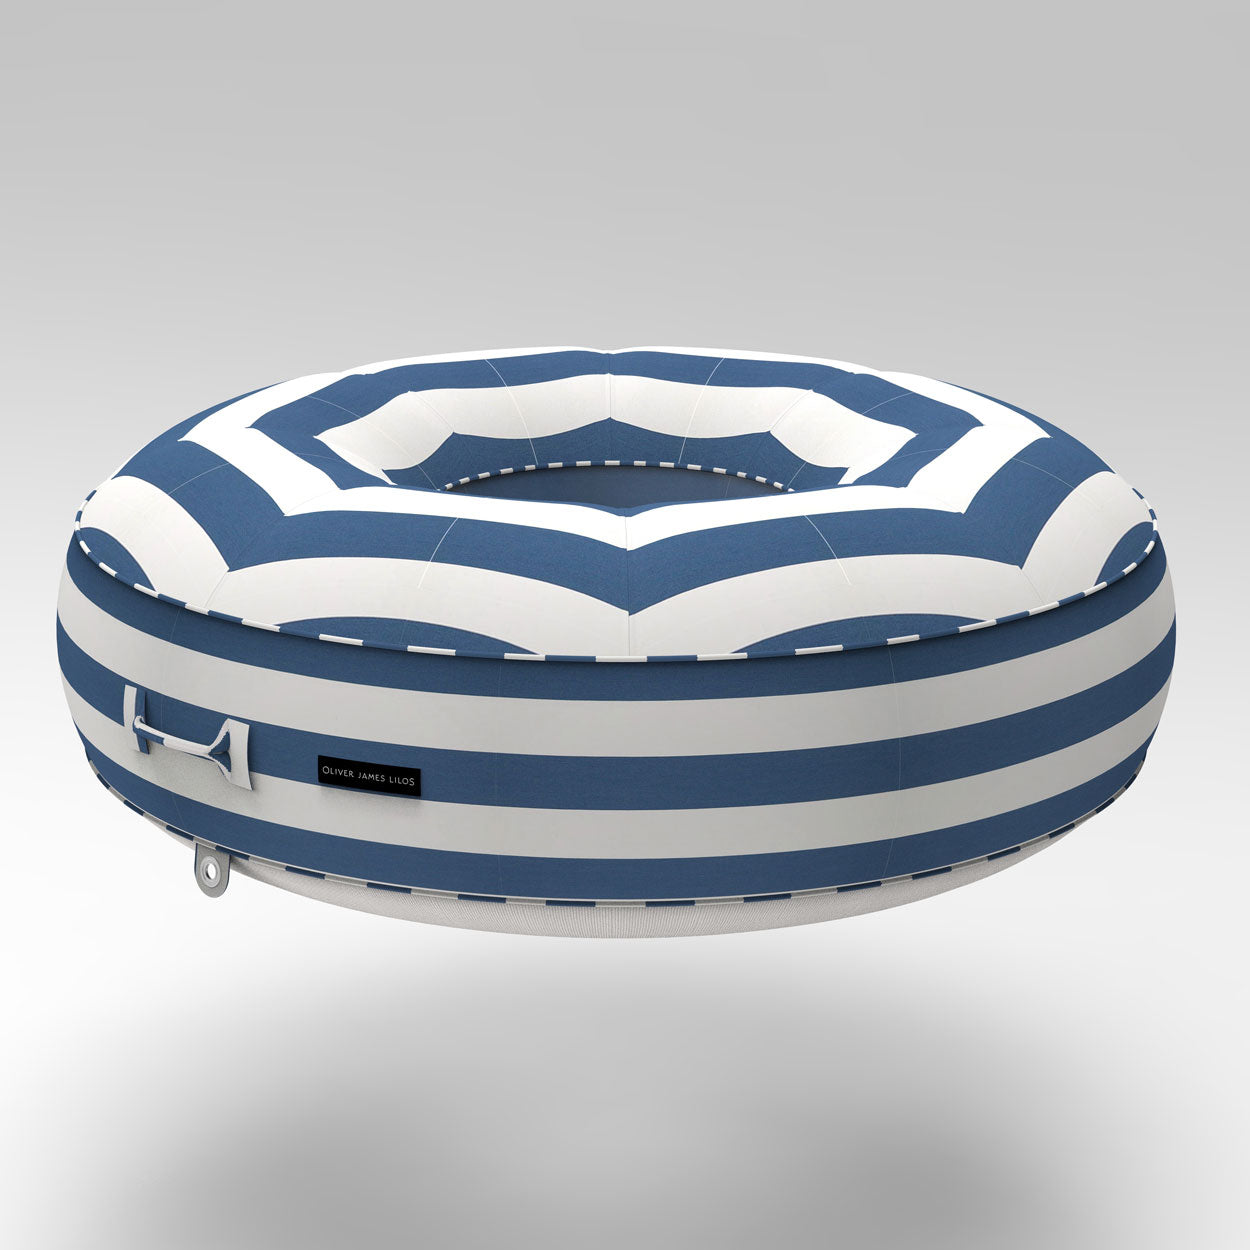 A render of an Oliver James Lilos Ring in blue and white stripes.